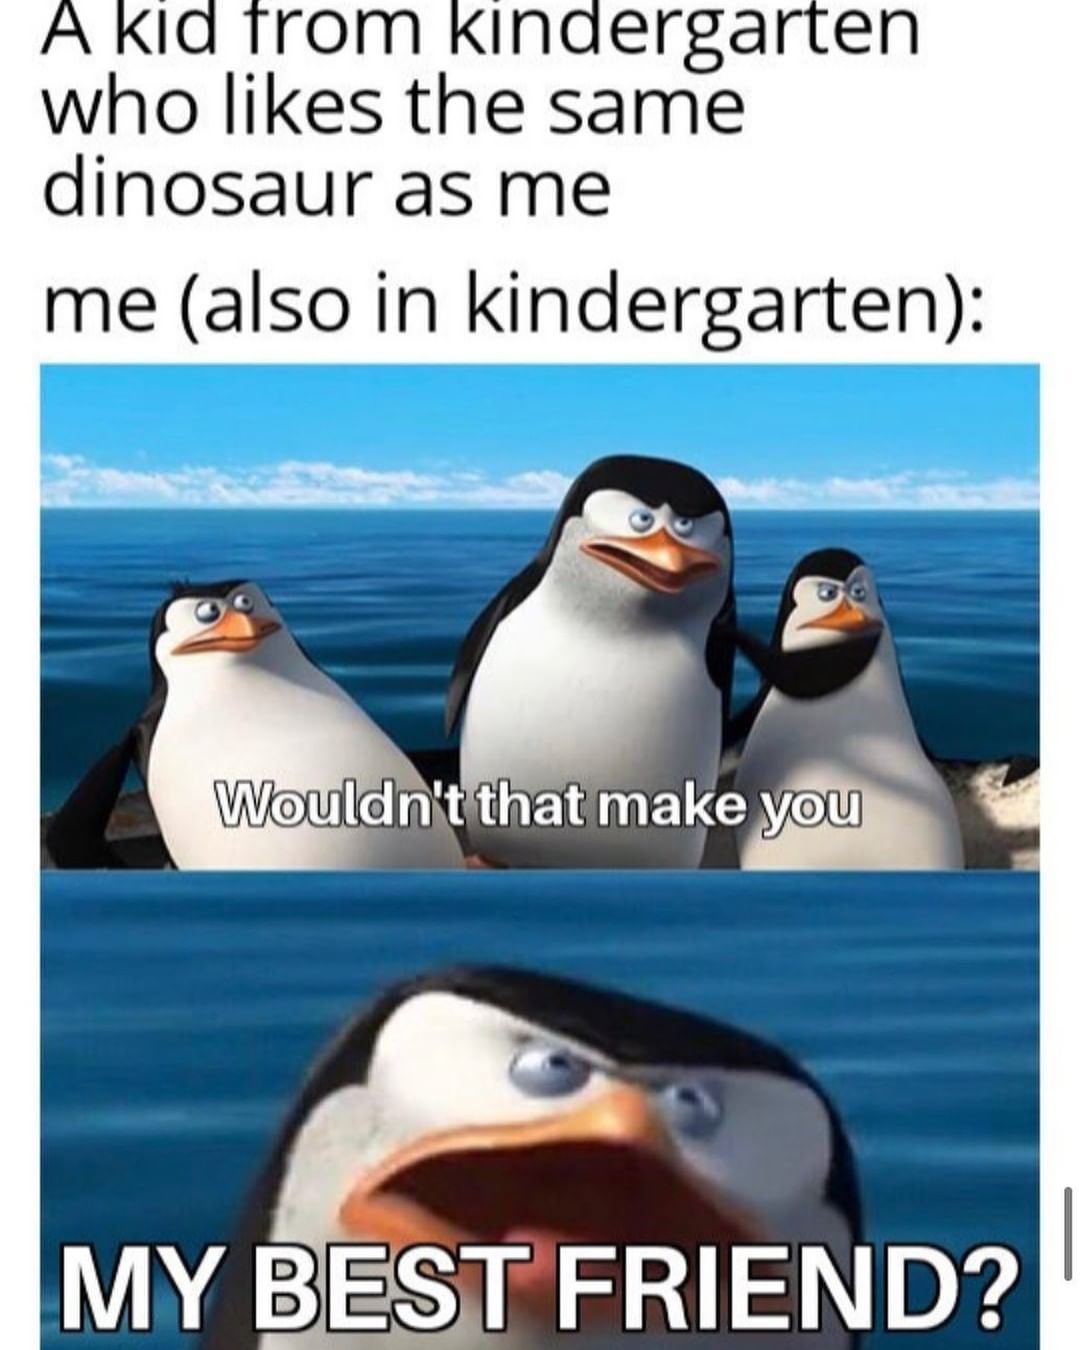 A kid from kindergarten who likes the same dinosaur as me. Me (also in kindergarten): Wouldn't that make you. My best friend?